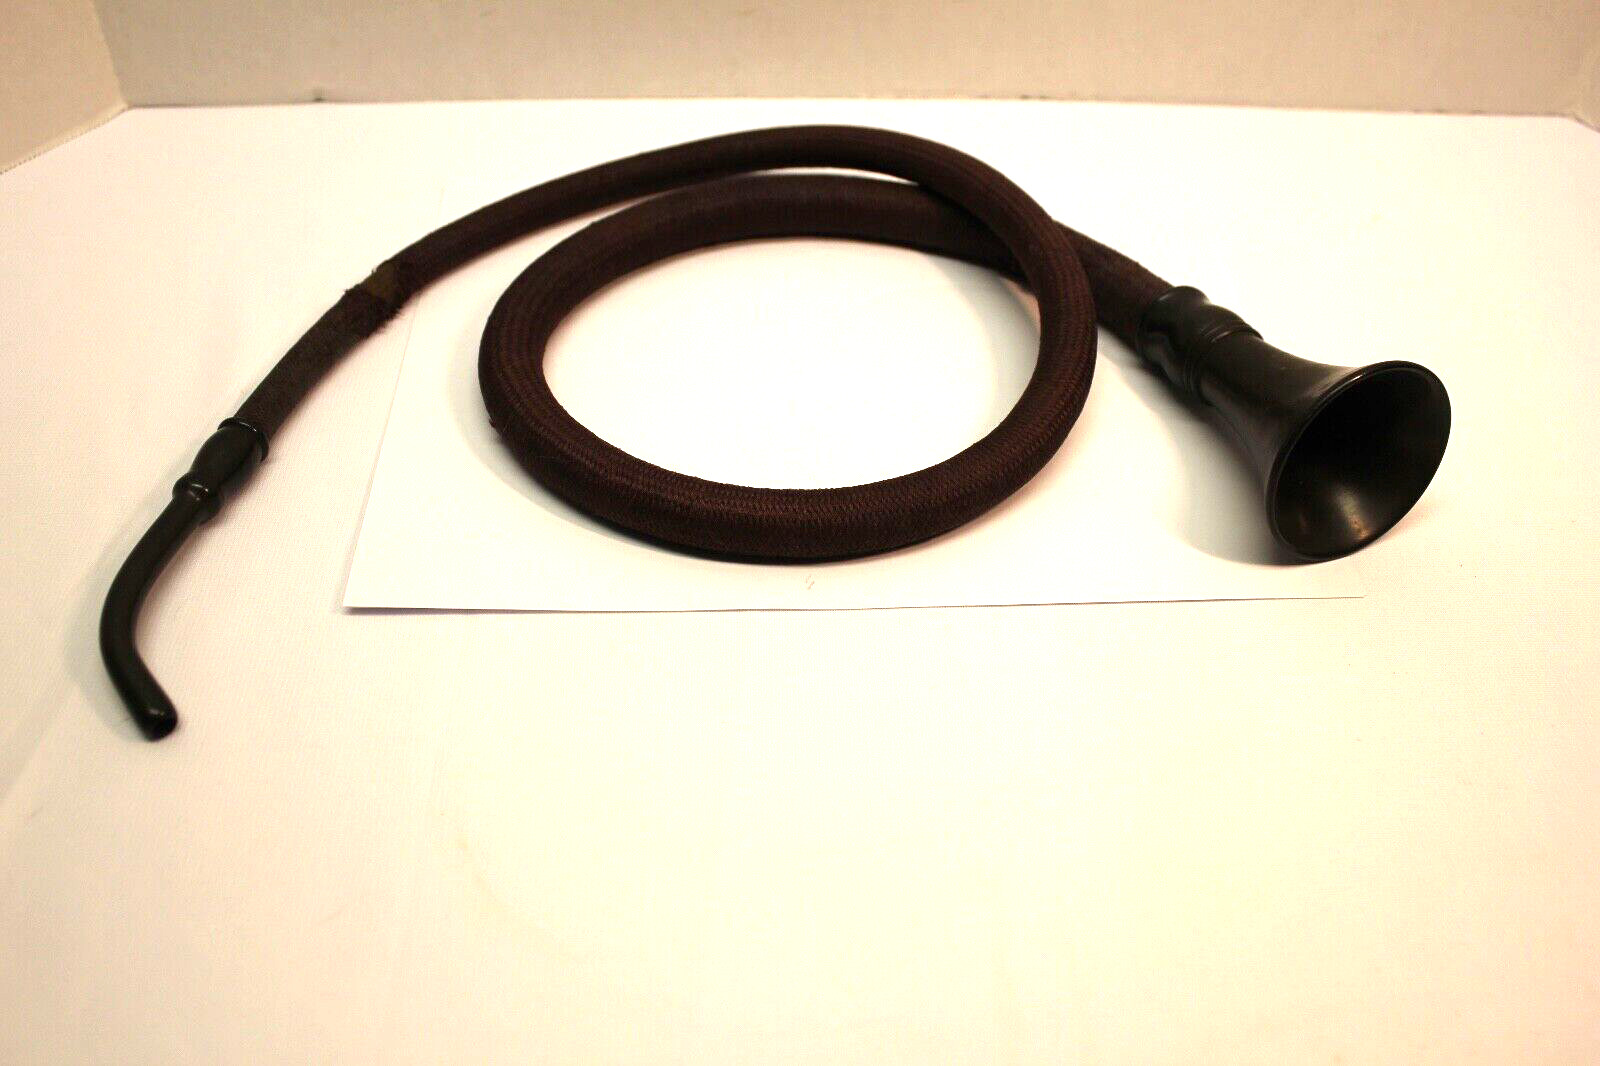 Antique Hearing Aid Tube Ear Medical Device - 1800's